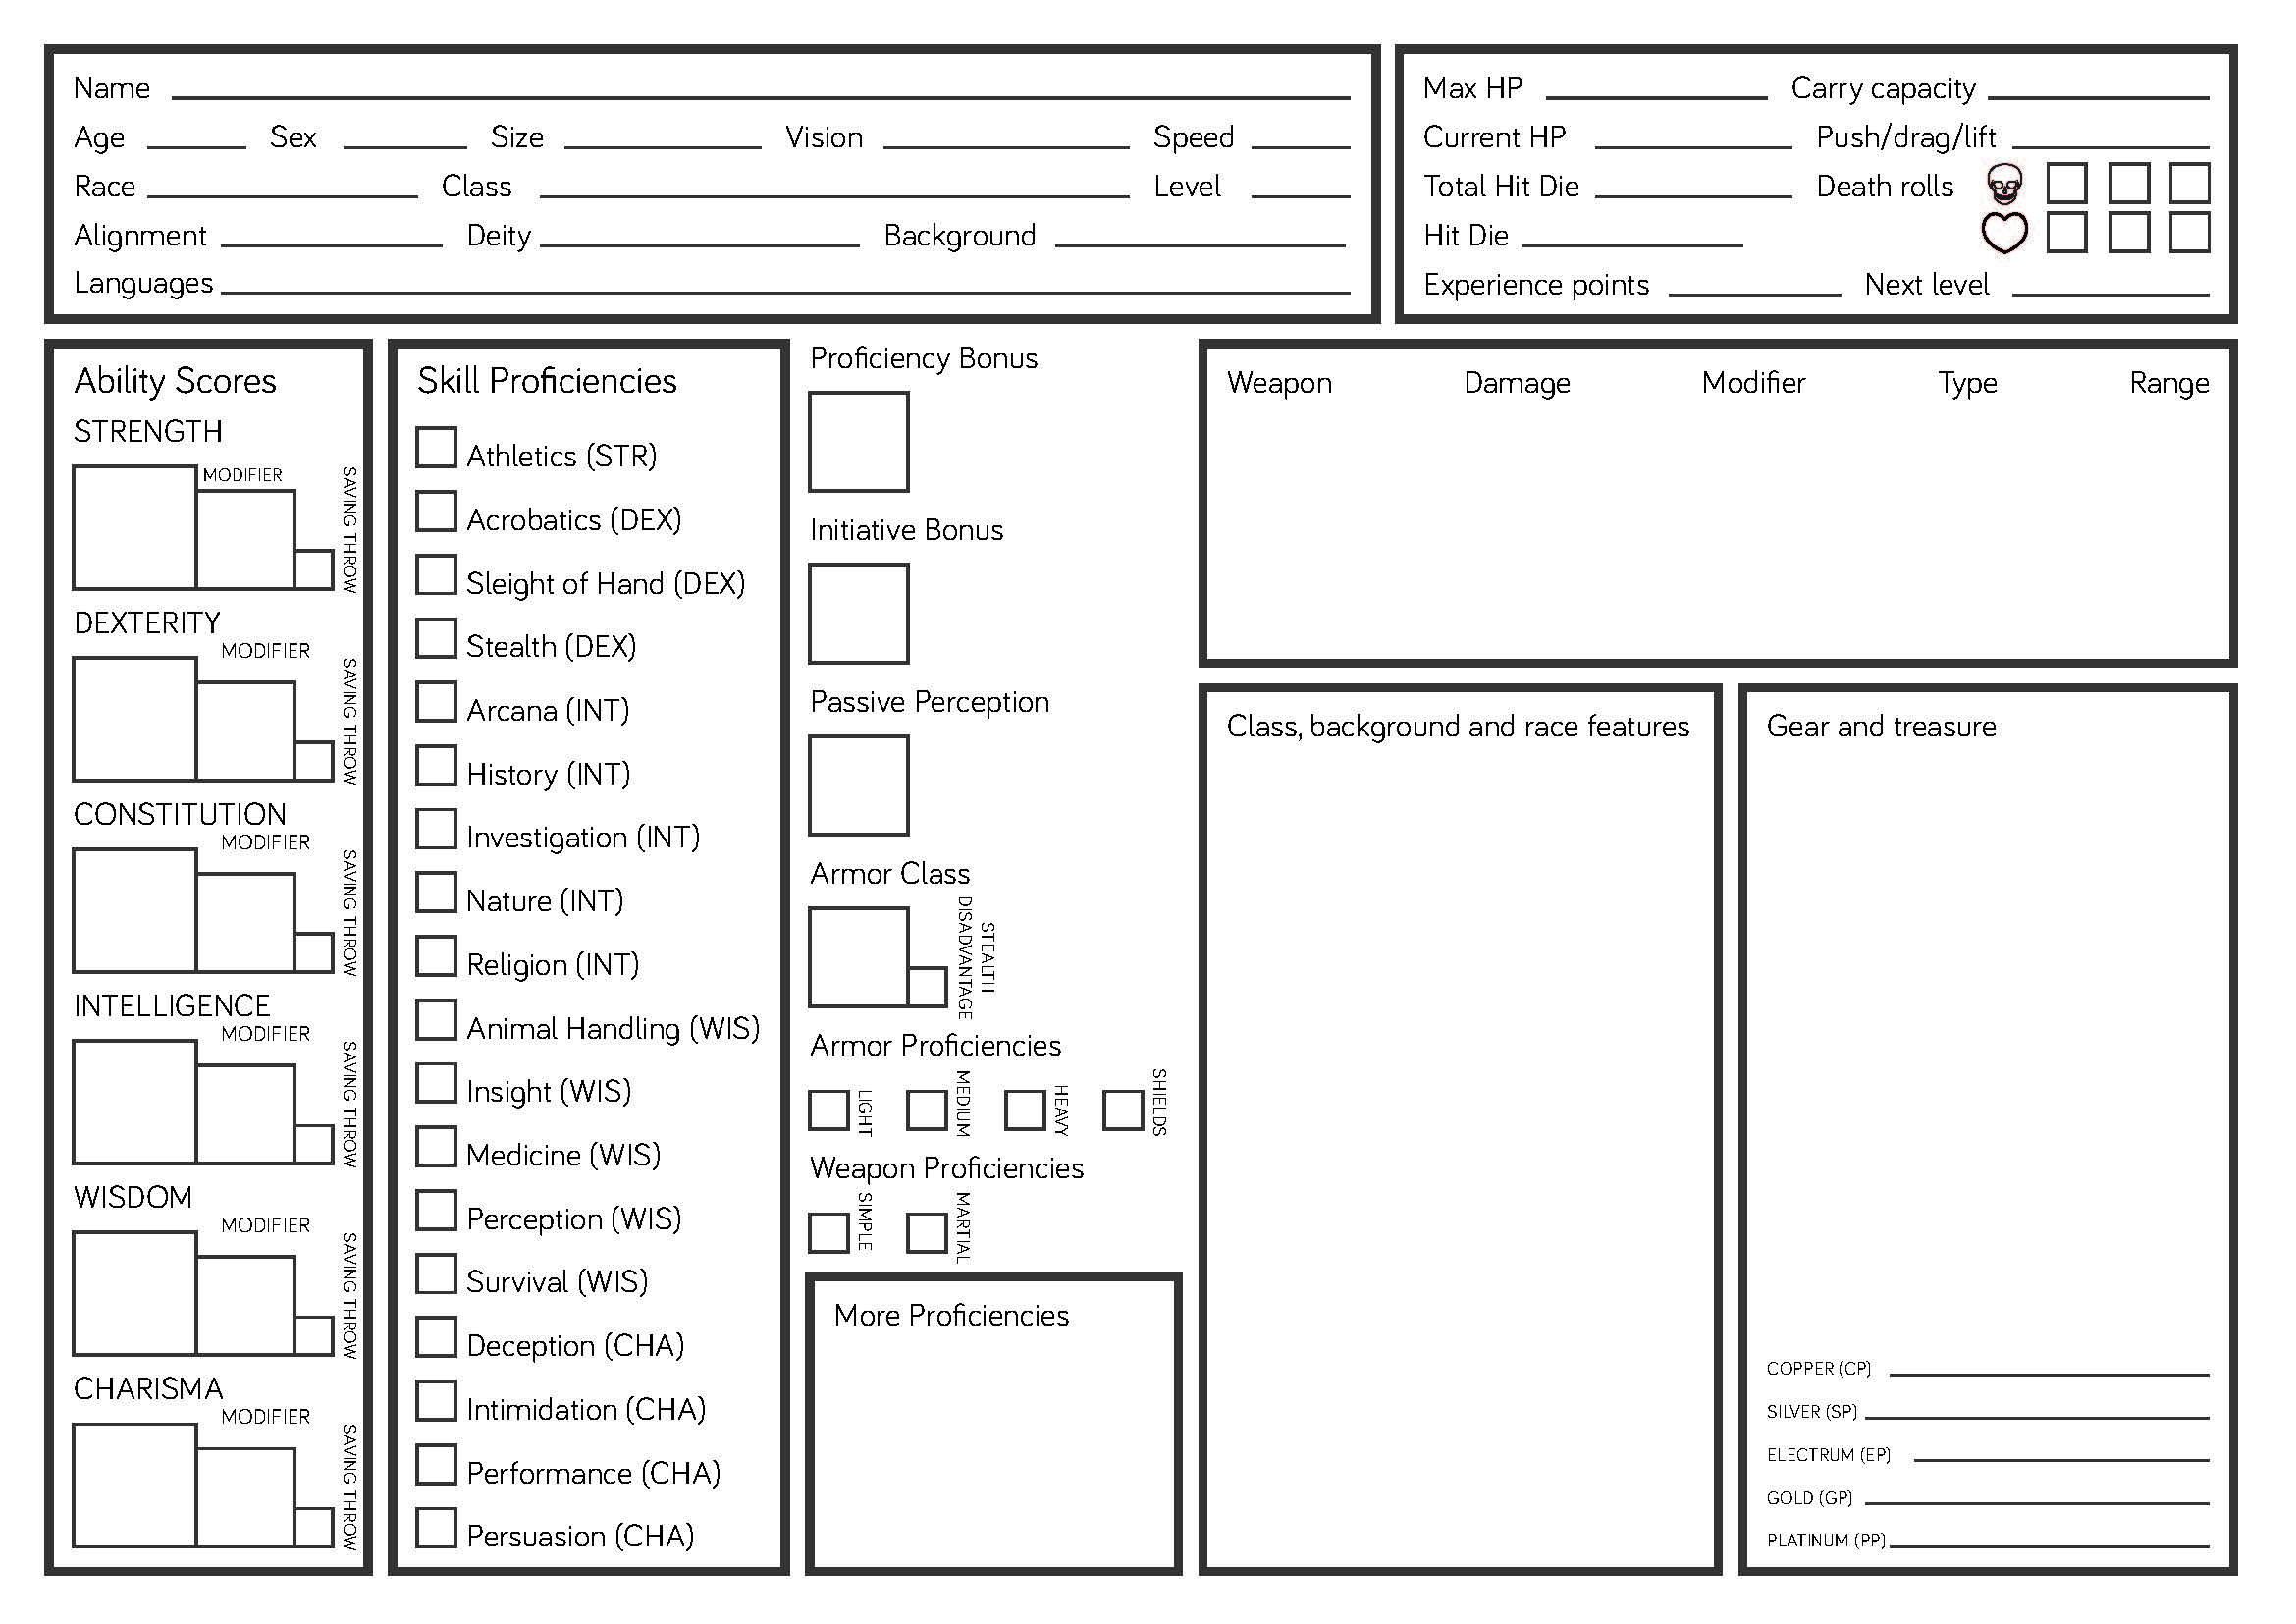 5332-Dungeonesque Character Sheet v01 by Love Muffin_Page_1.jpg